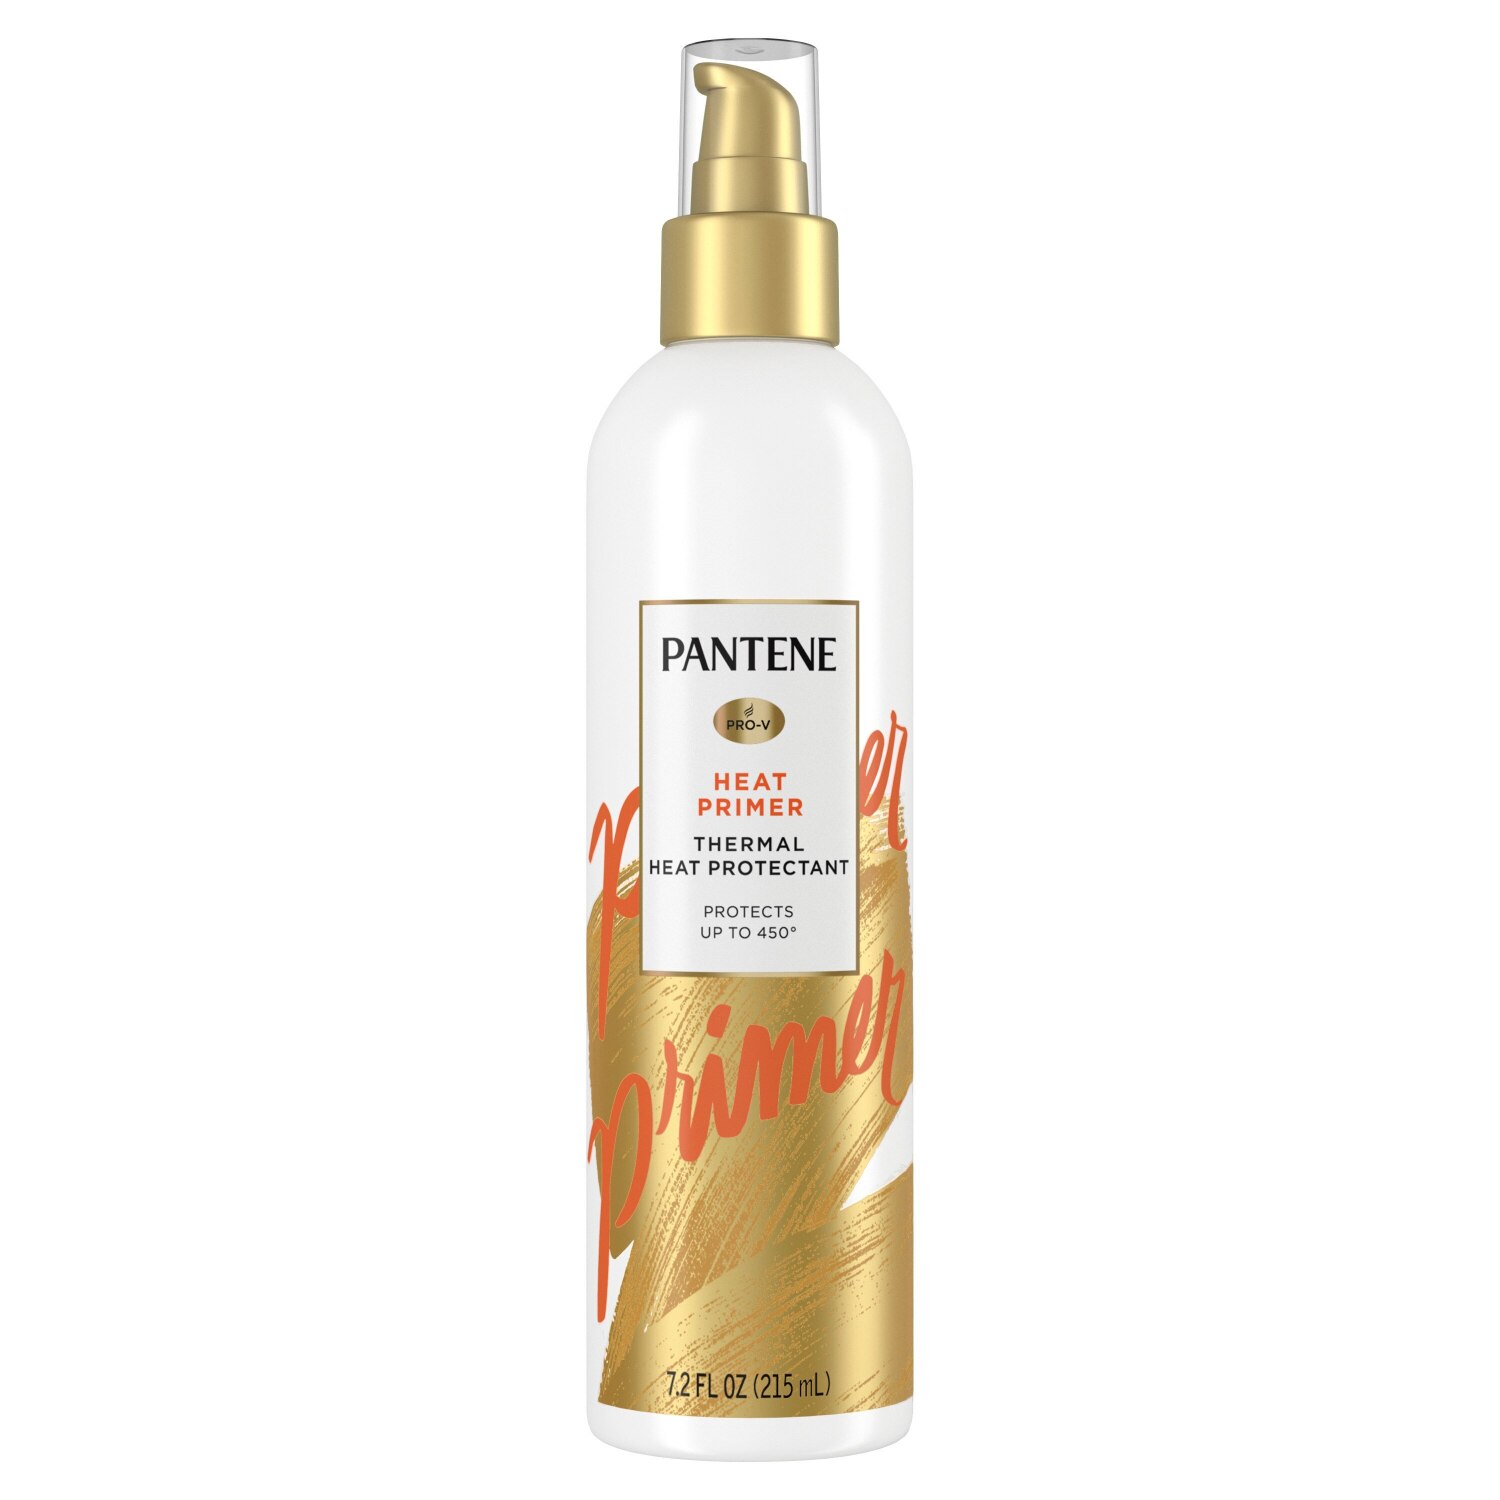 Pantene Pro-V Nutrient Boost Heat Primer Thermal Heat Protection Pre-Styling, 6.4 OZ